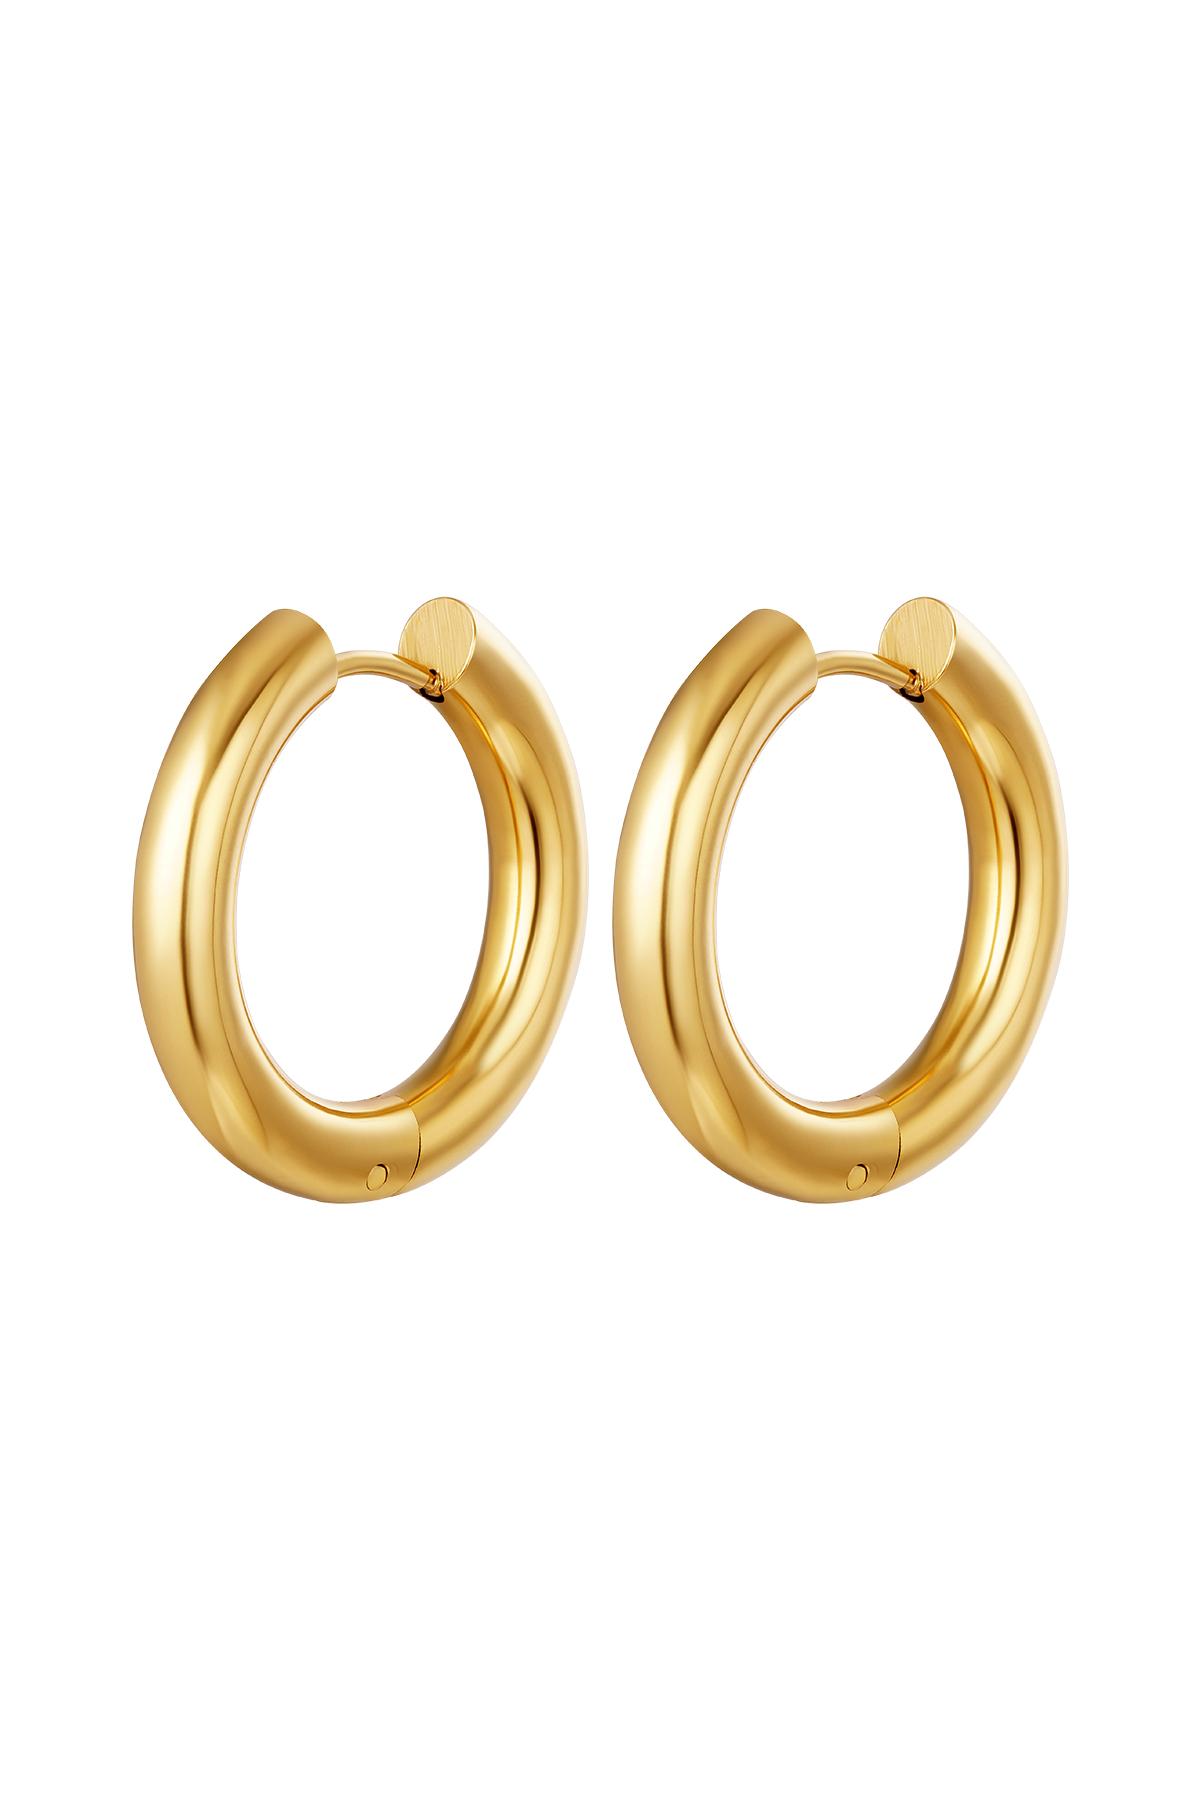 Basic creoles earrings - large Gold Stainless Steel